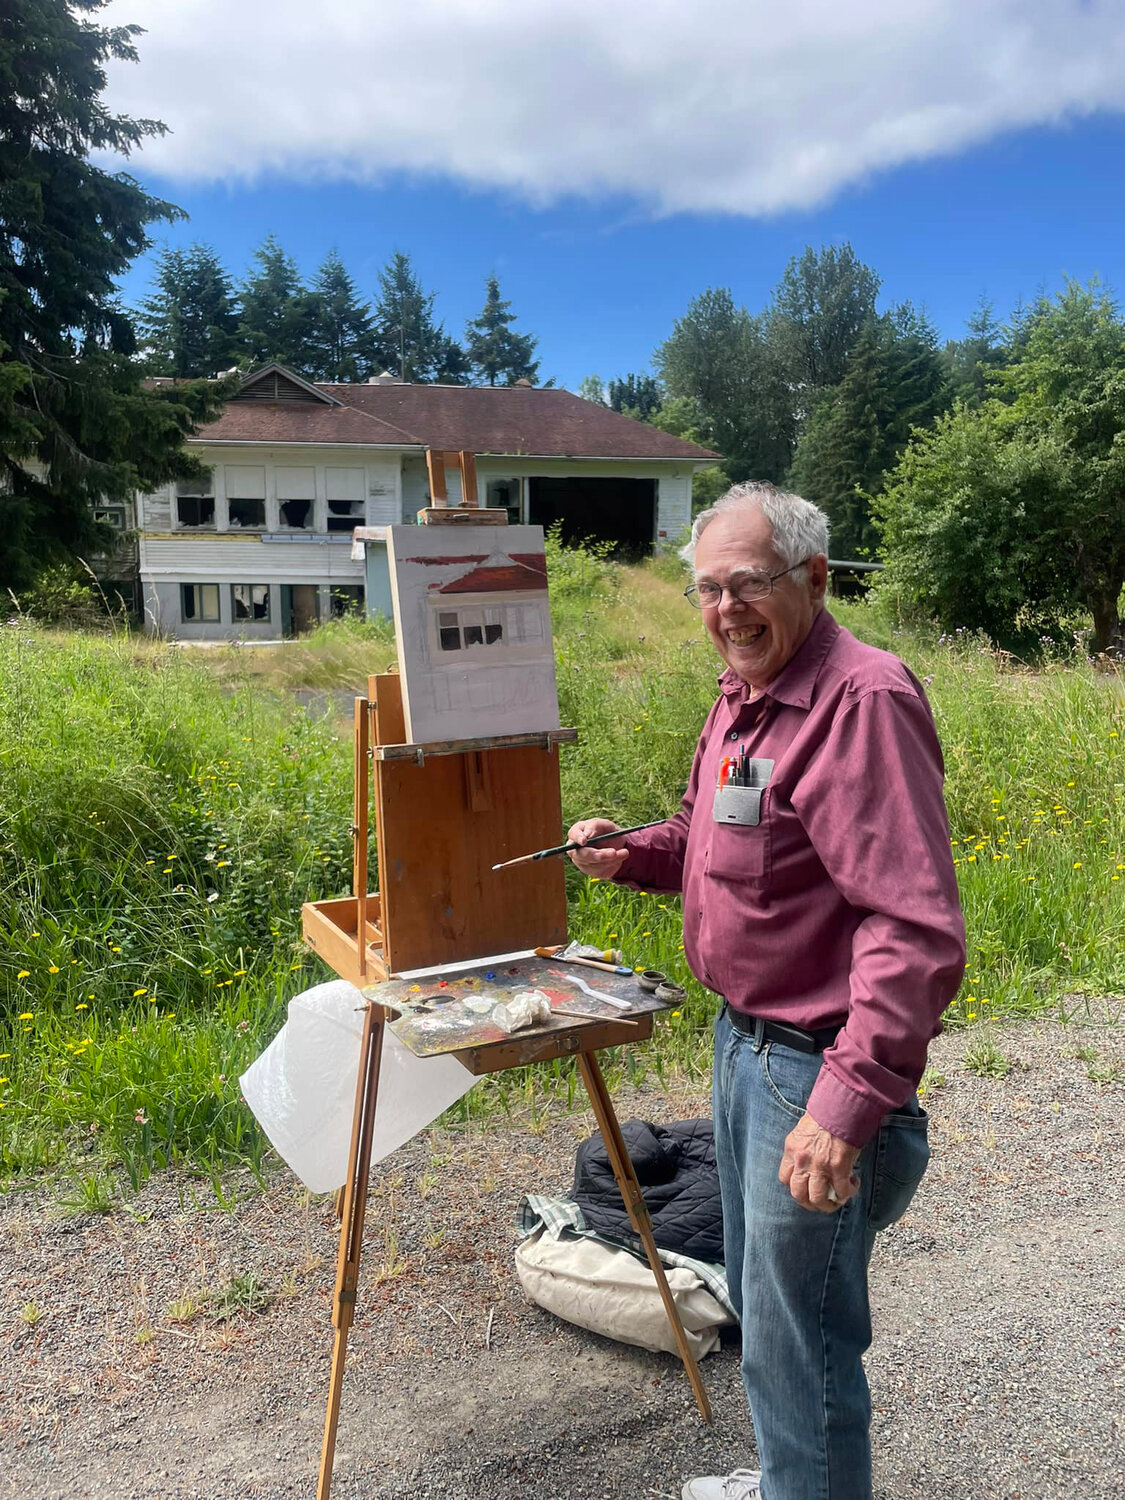 Chehalis artist Charlie Funk set up his easel to paint the old Dryad School from the Willapa Hills Trail, as photographed in July 2022 by Jammie Hoffman, who graciously provided this photo.